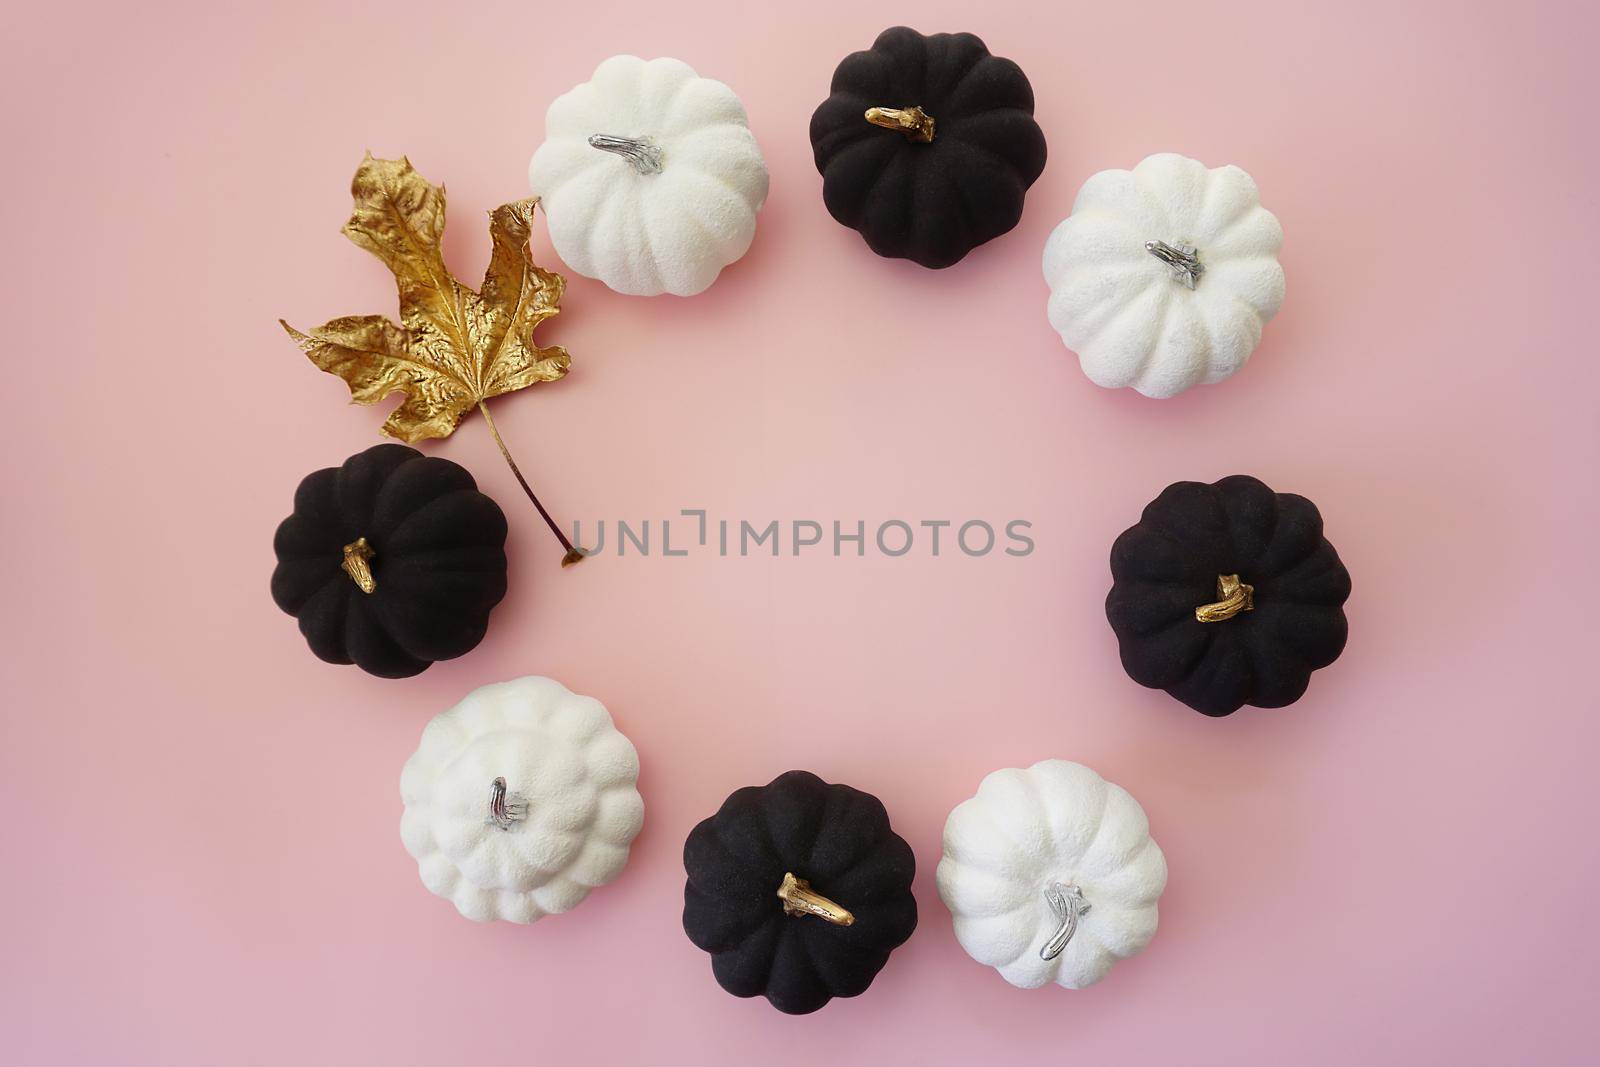 Decorative pumpkins and a golden maple leaf are laid out in a circle